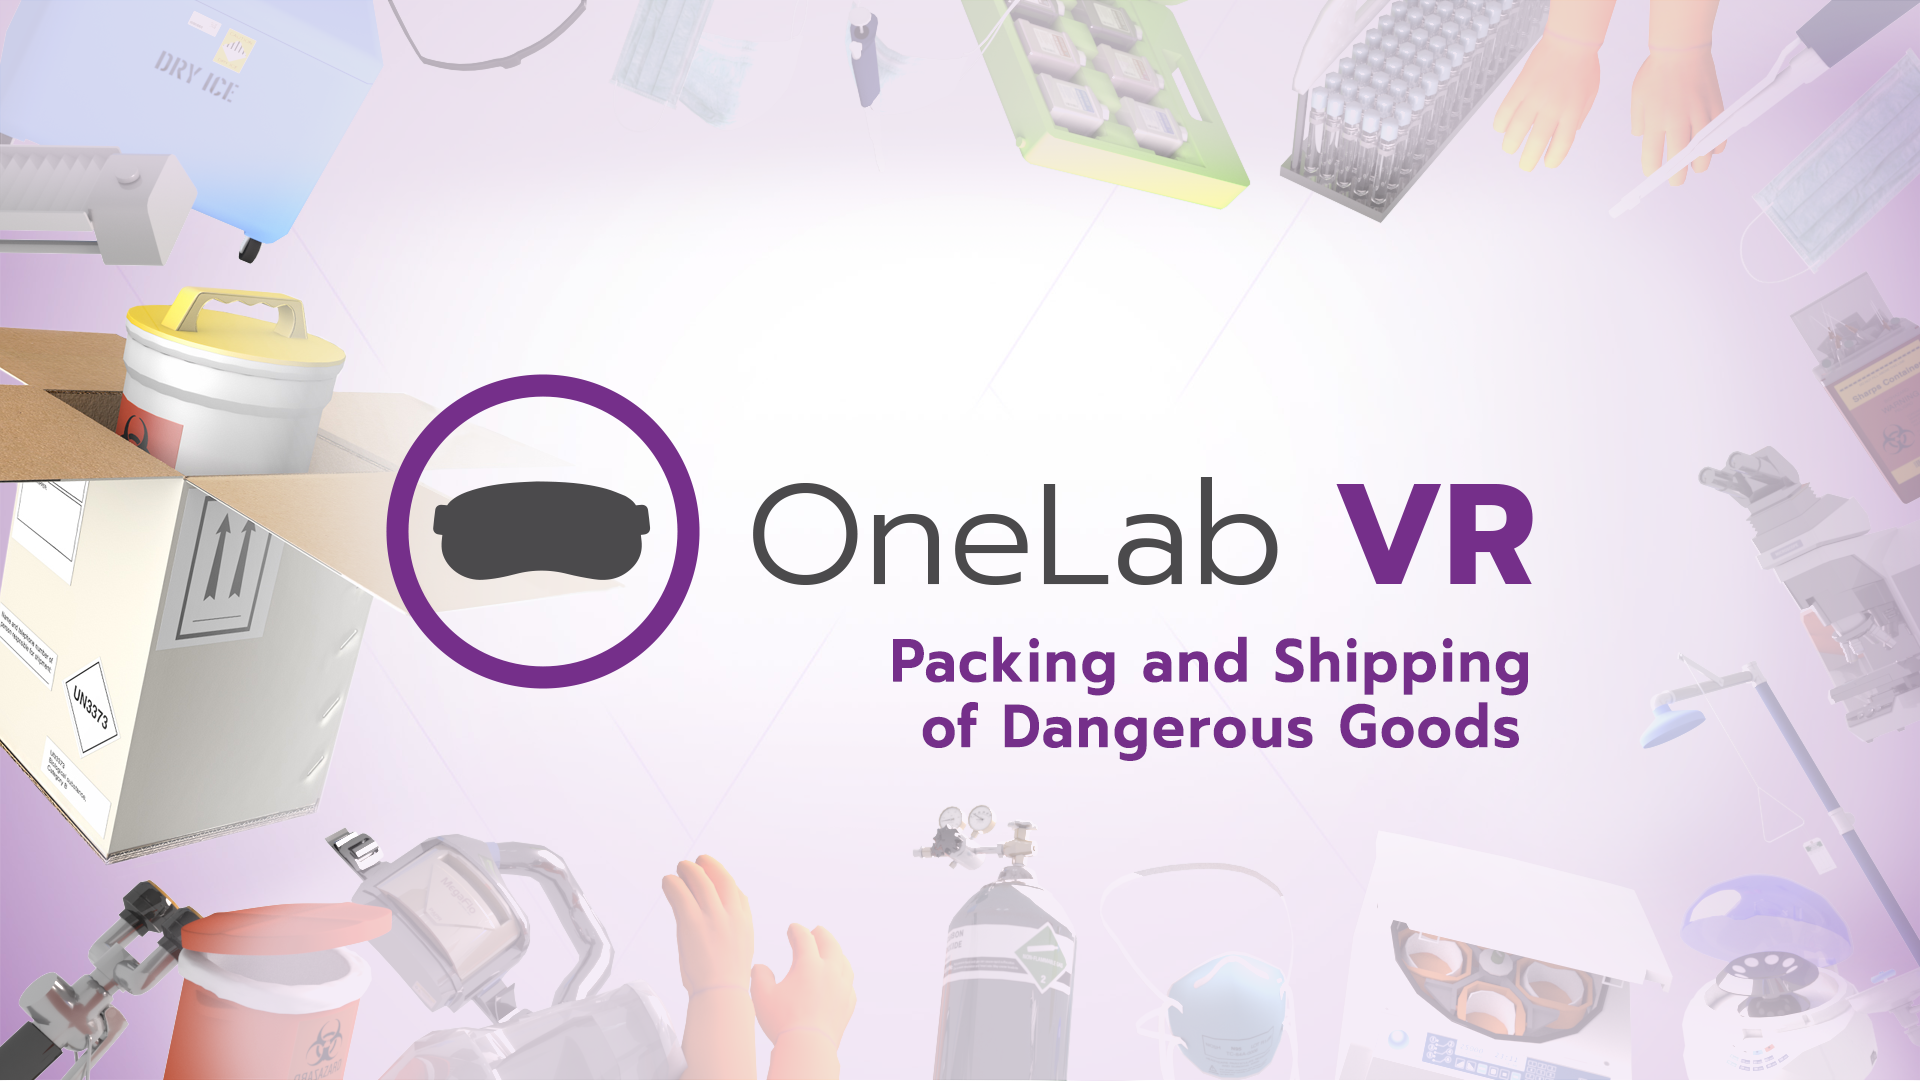 OneLab VR: Packing and Shipping Dangerous Goods Image